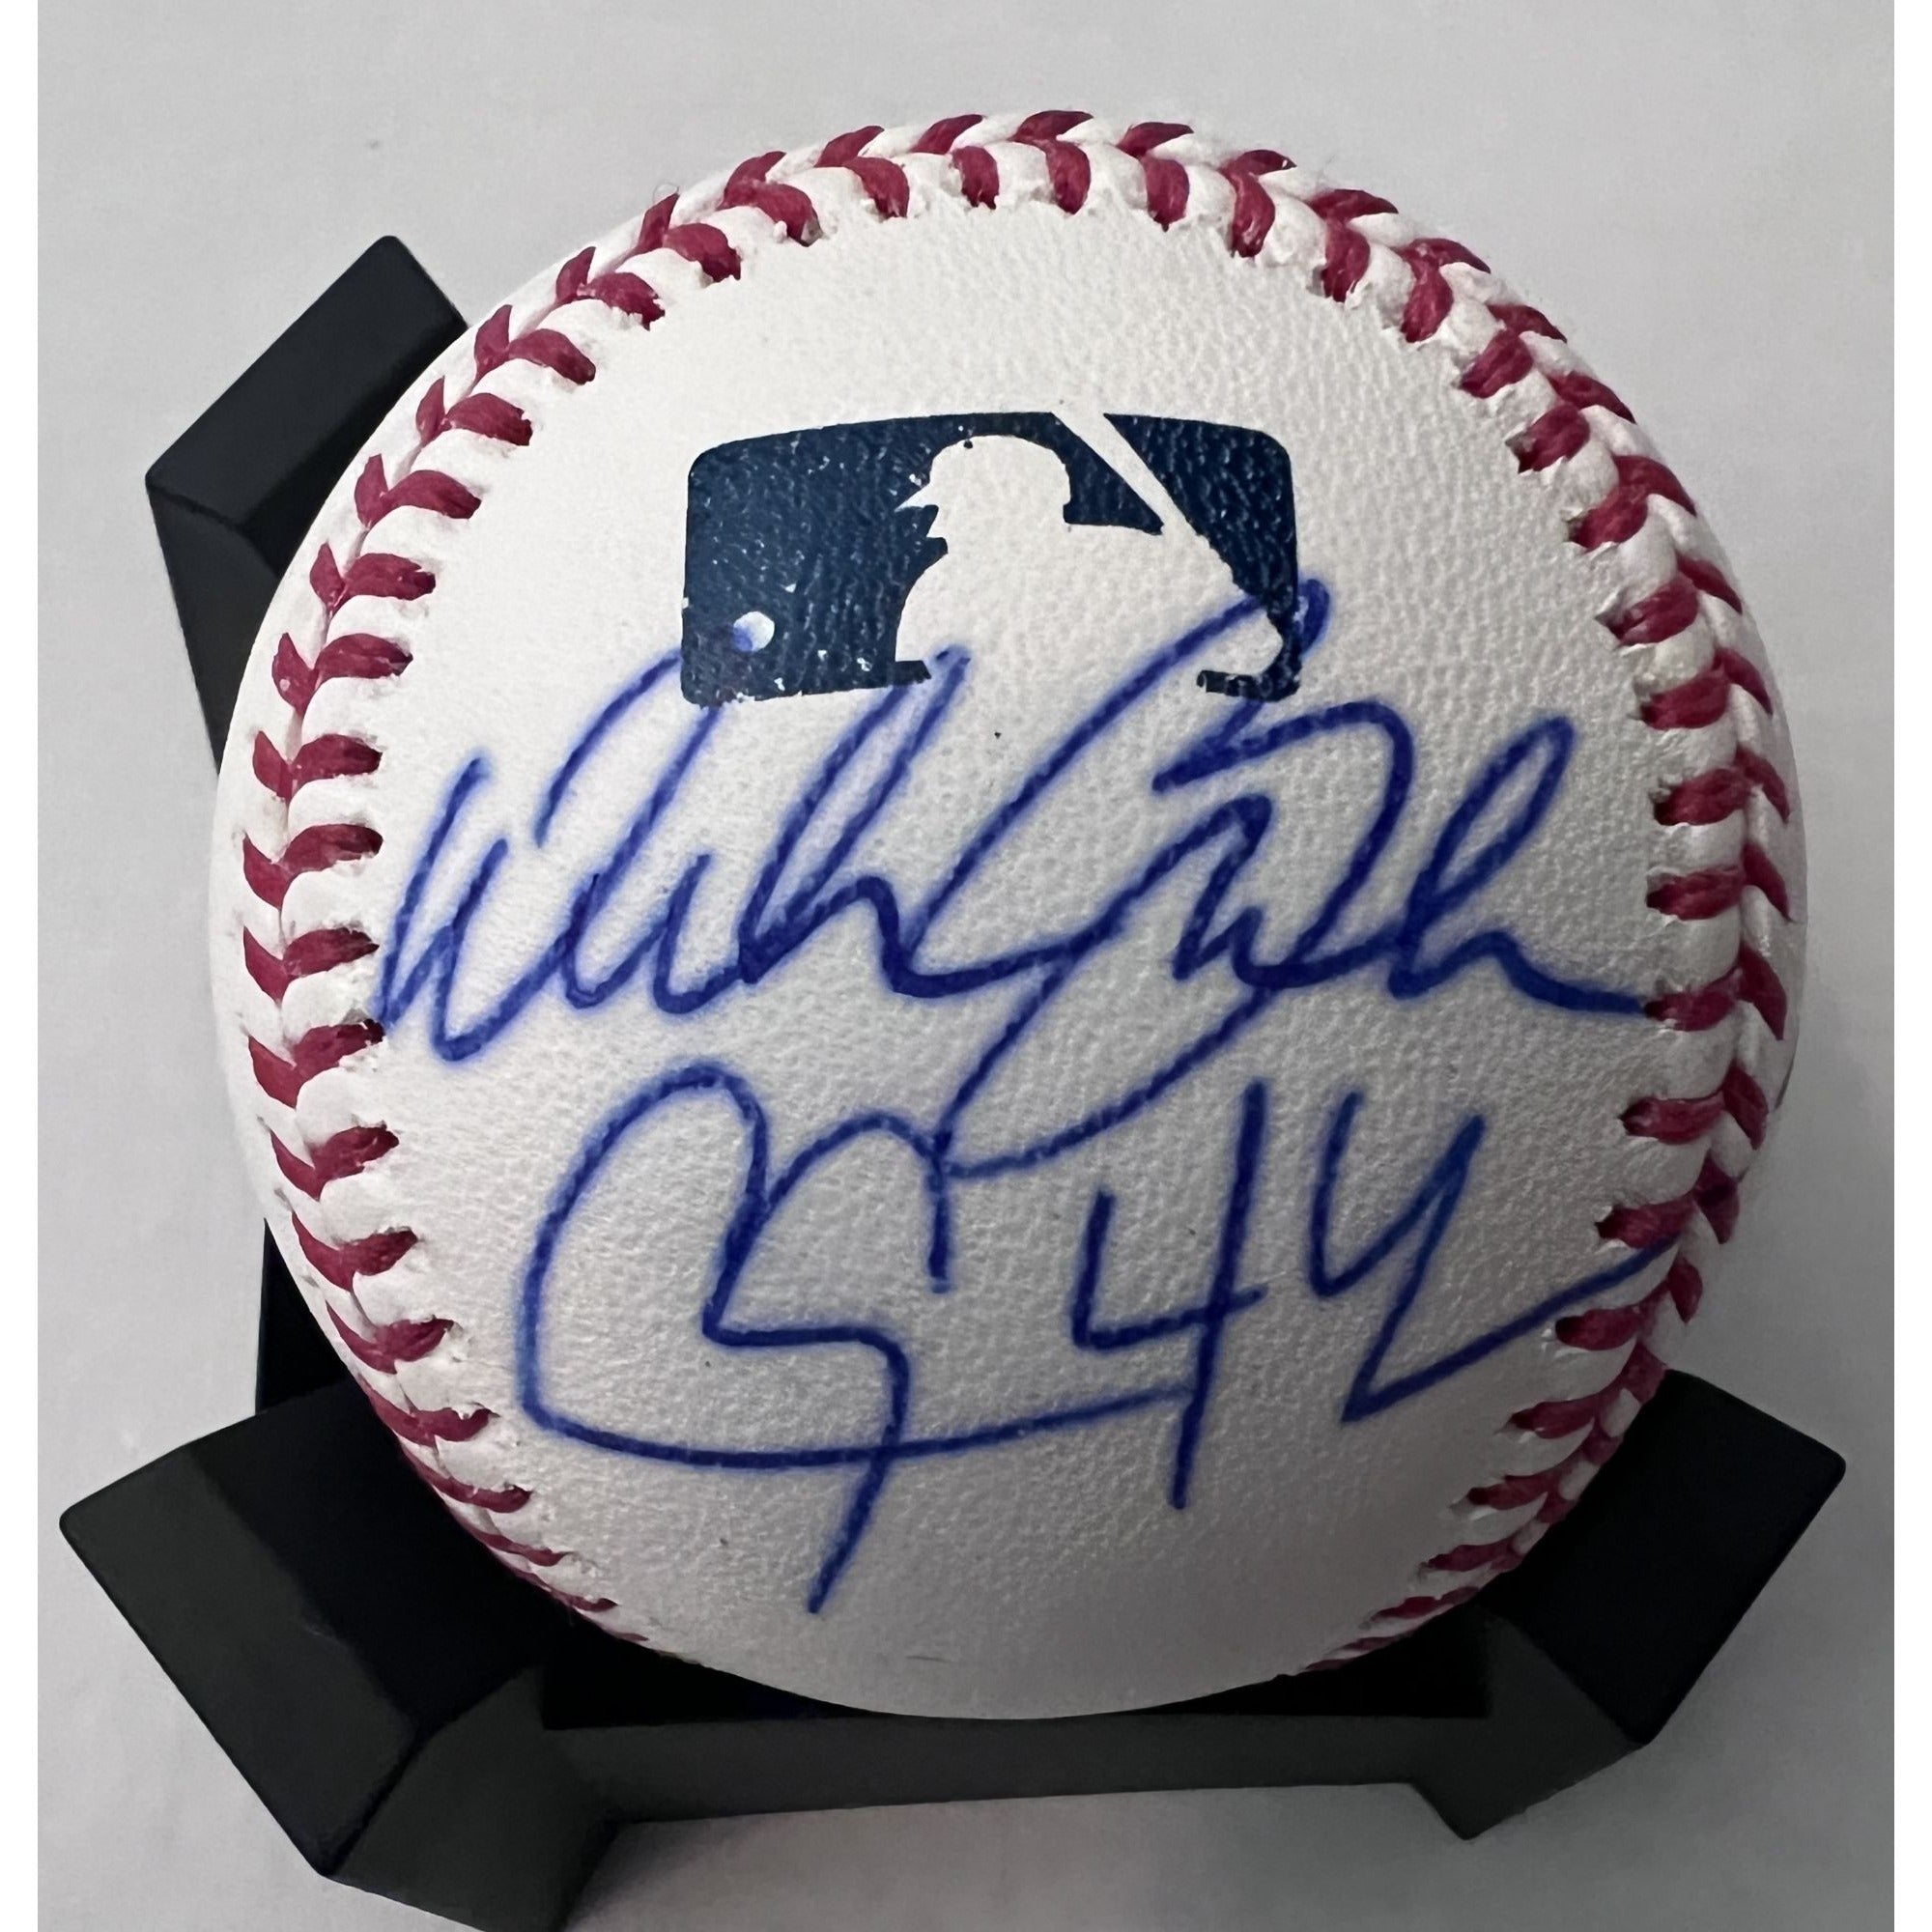 Los Angeles Dodgers Walker Bueller Clayton Kershaw Official Rawlings MLB Baseball Signed with Proof by Awesome Artifact